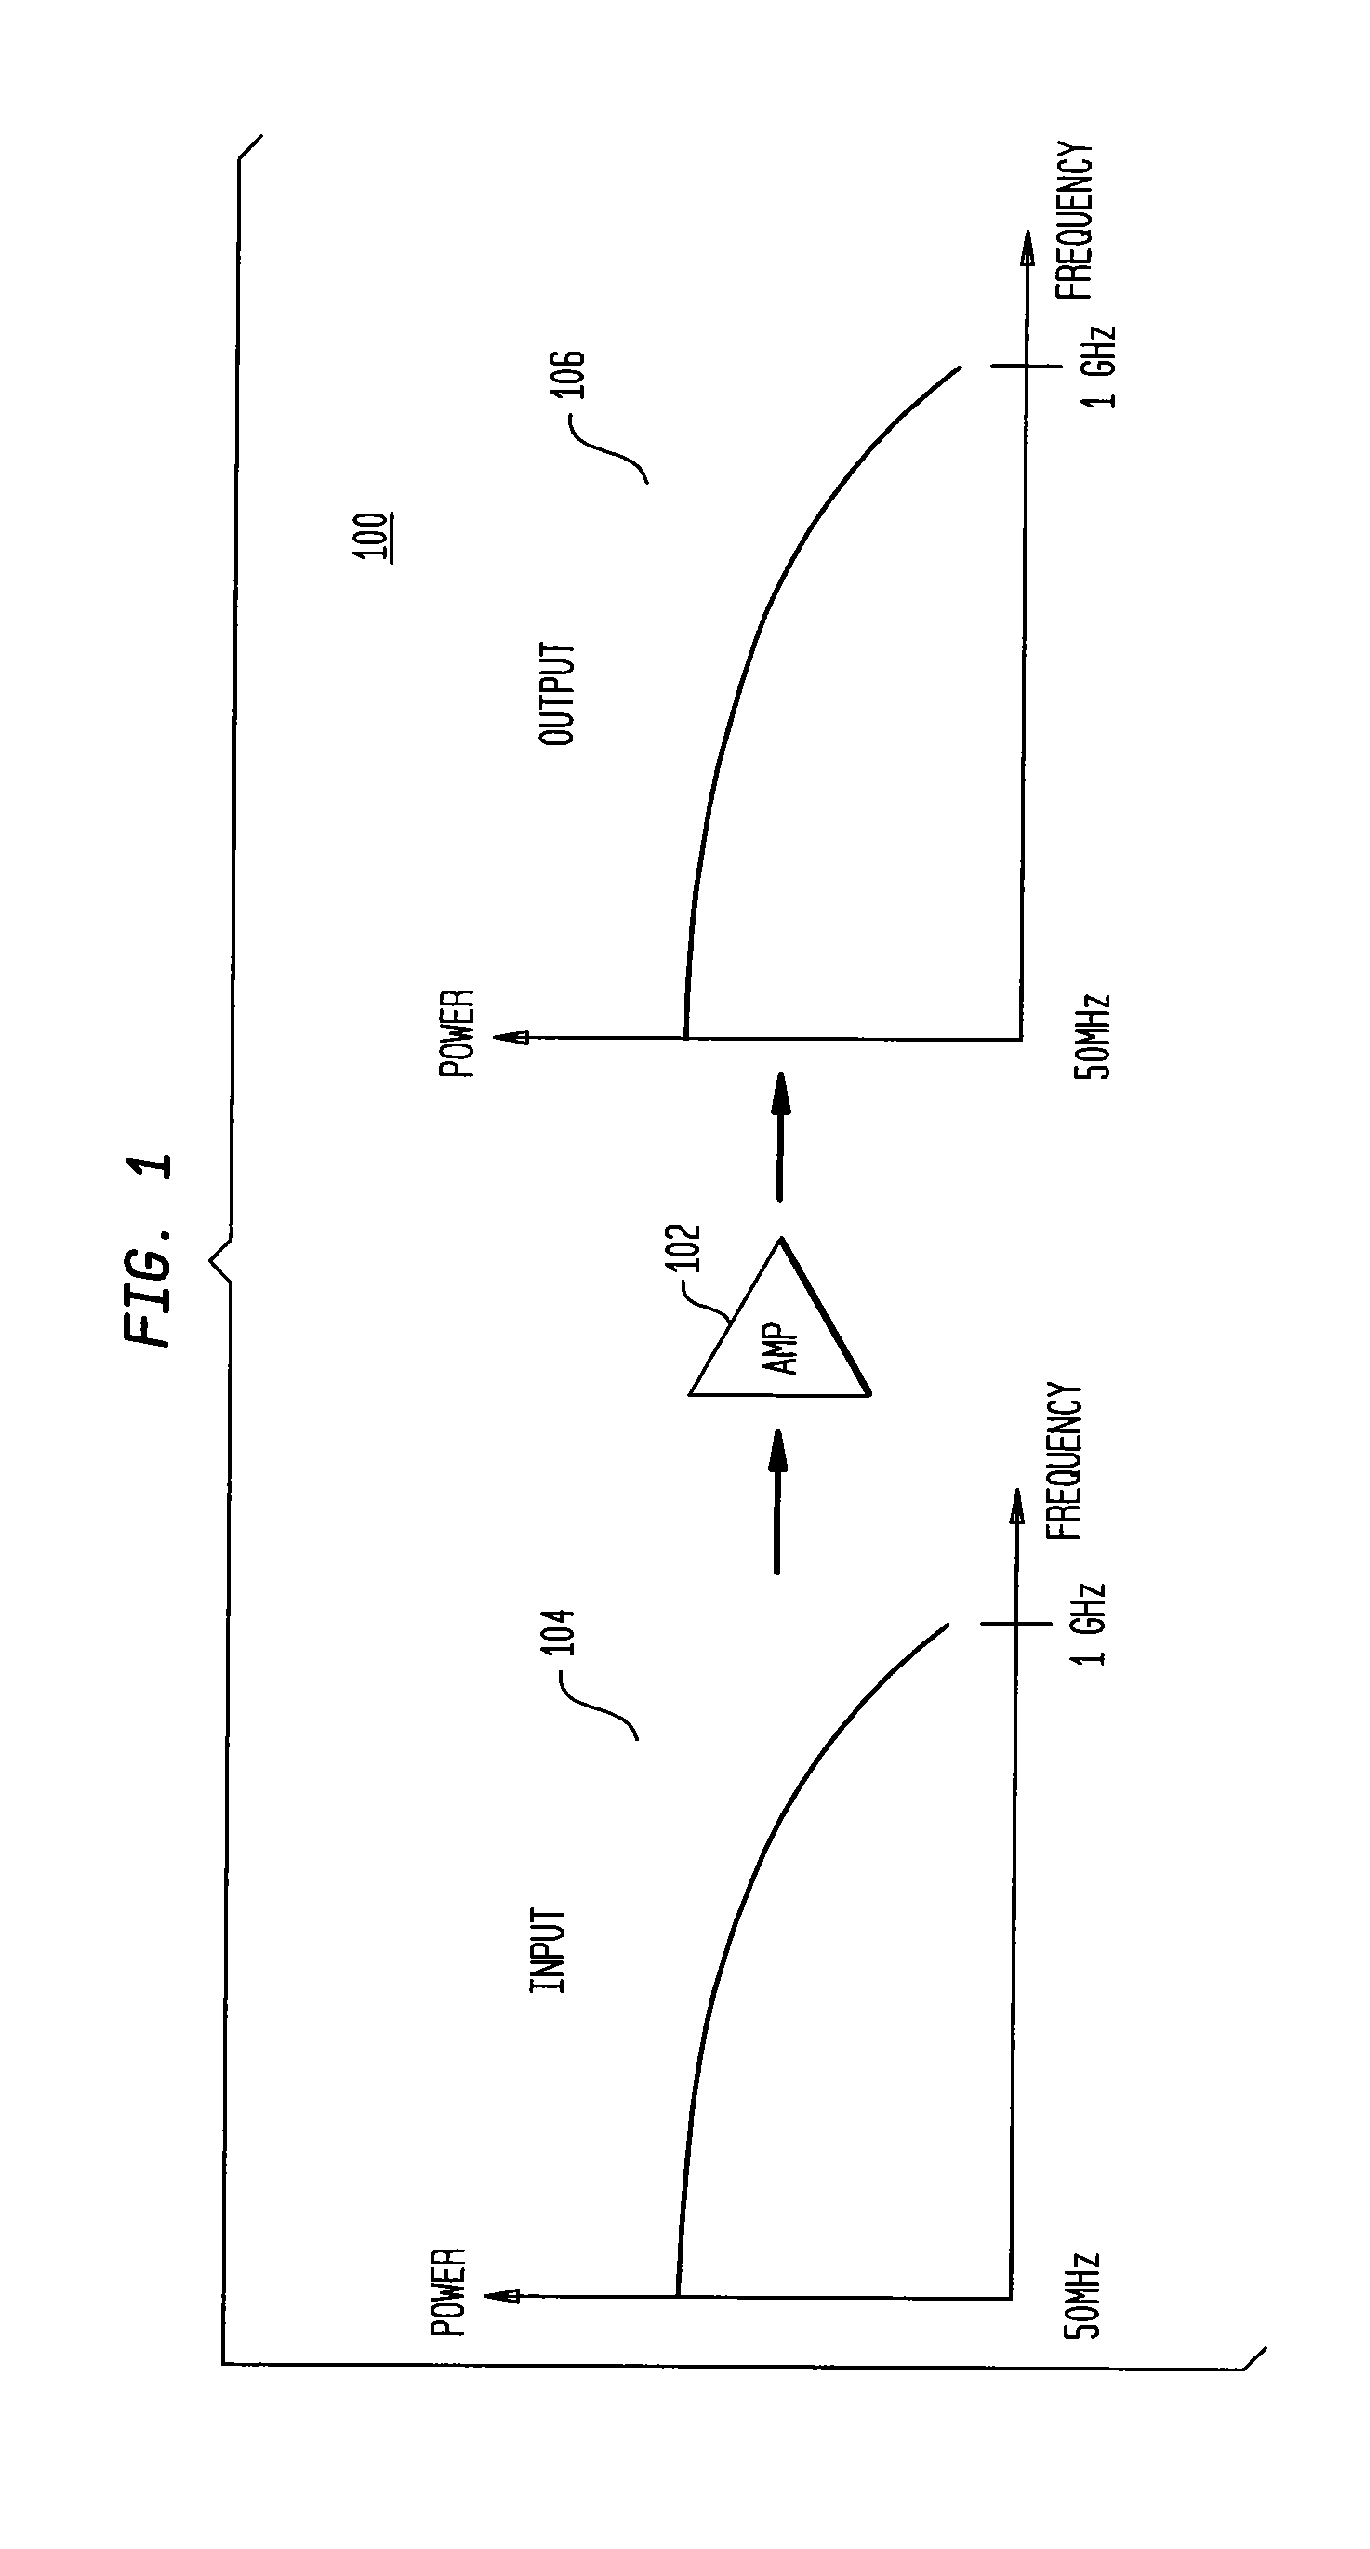 Amplifier with automatic gain profile control and calibration